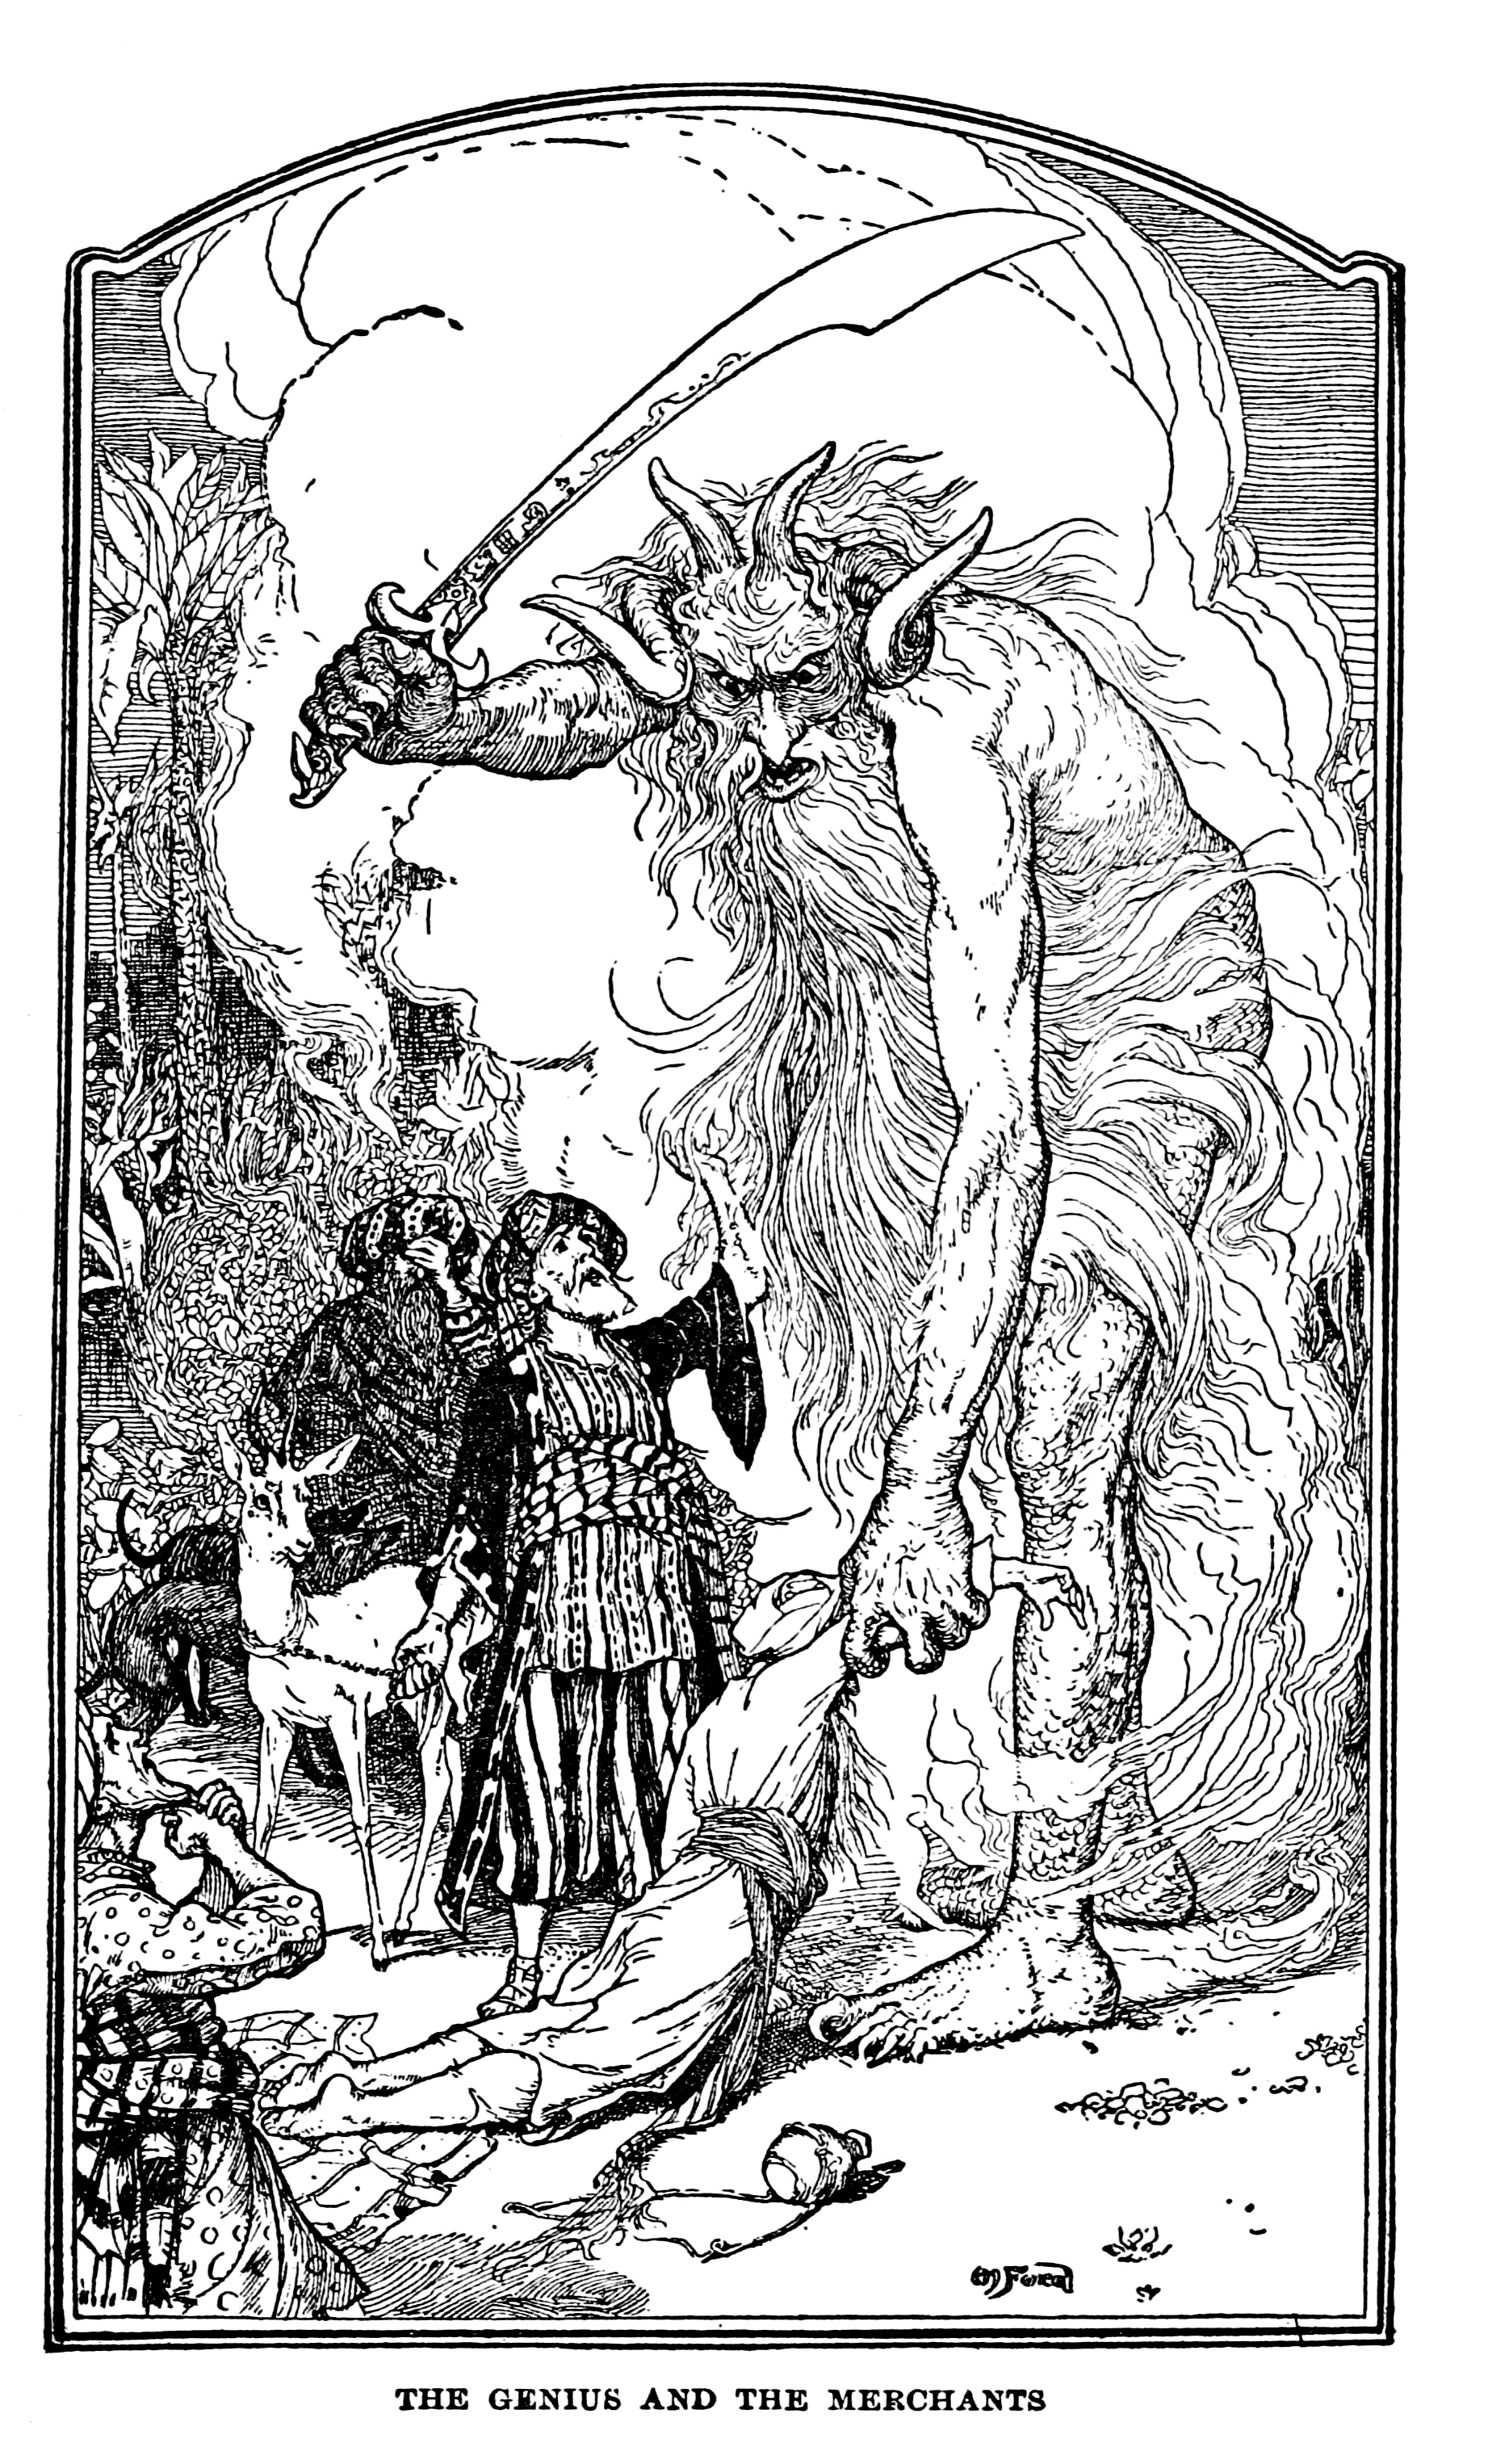 Henry Justice Ford - The Arabian nights entertainments selected and edited by Andrew Lang, 1898 (illustration 7)